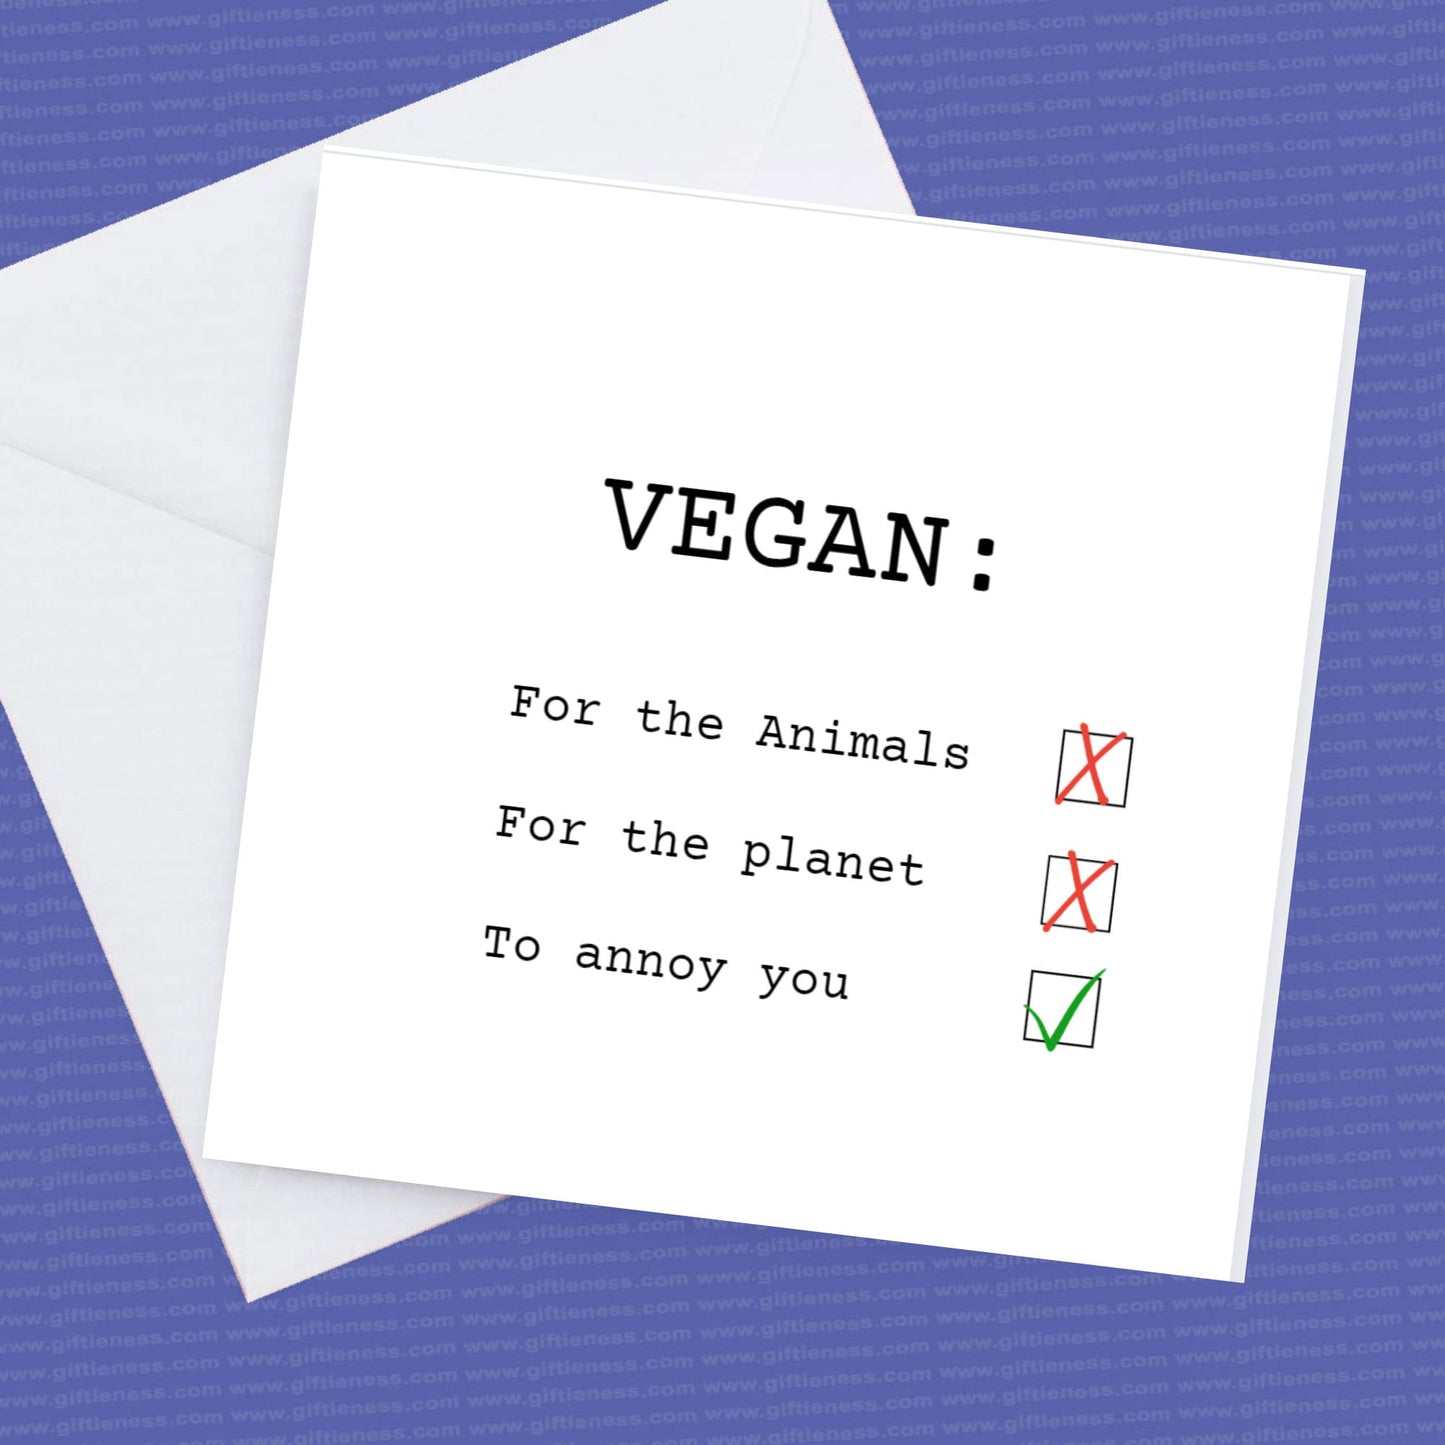 Vegan To Annoy You Card and envelope